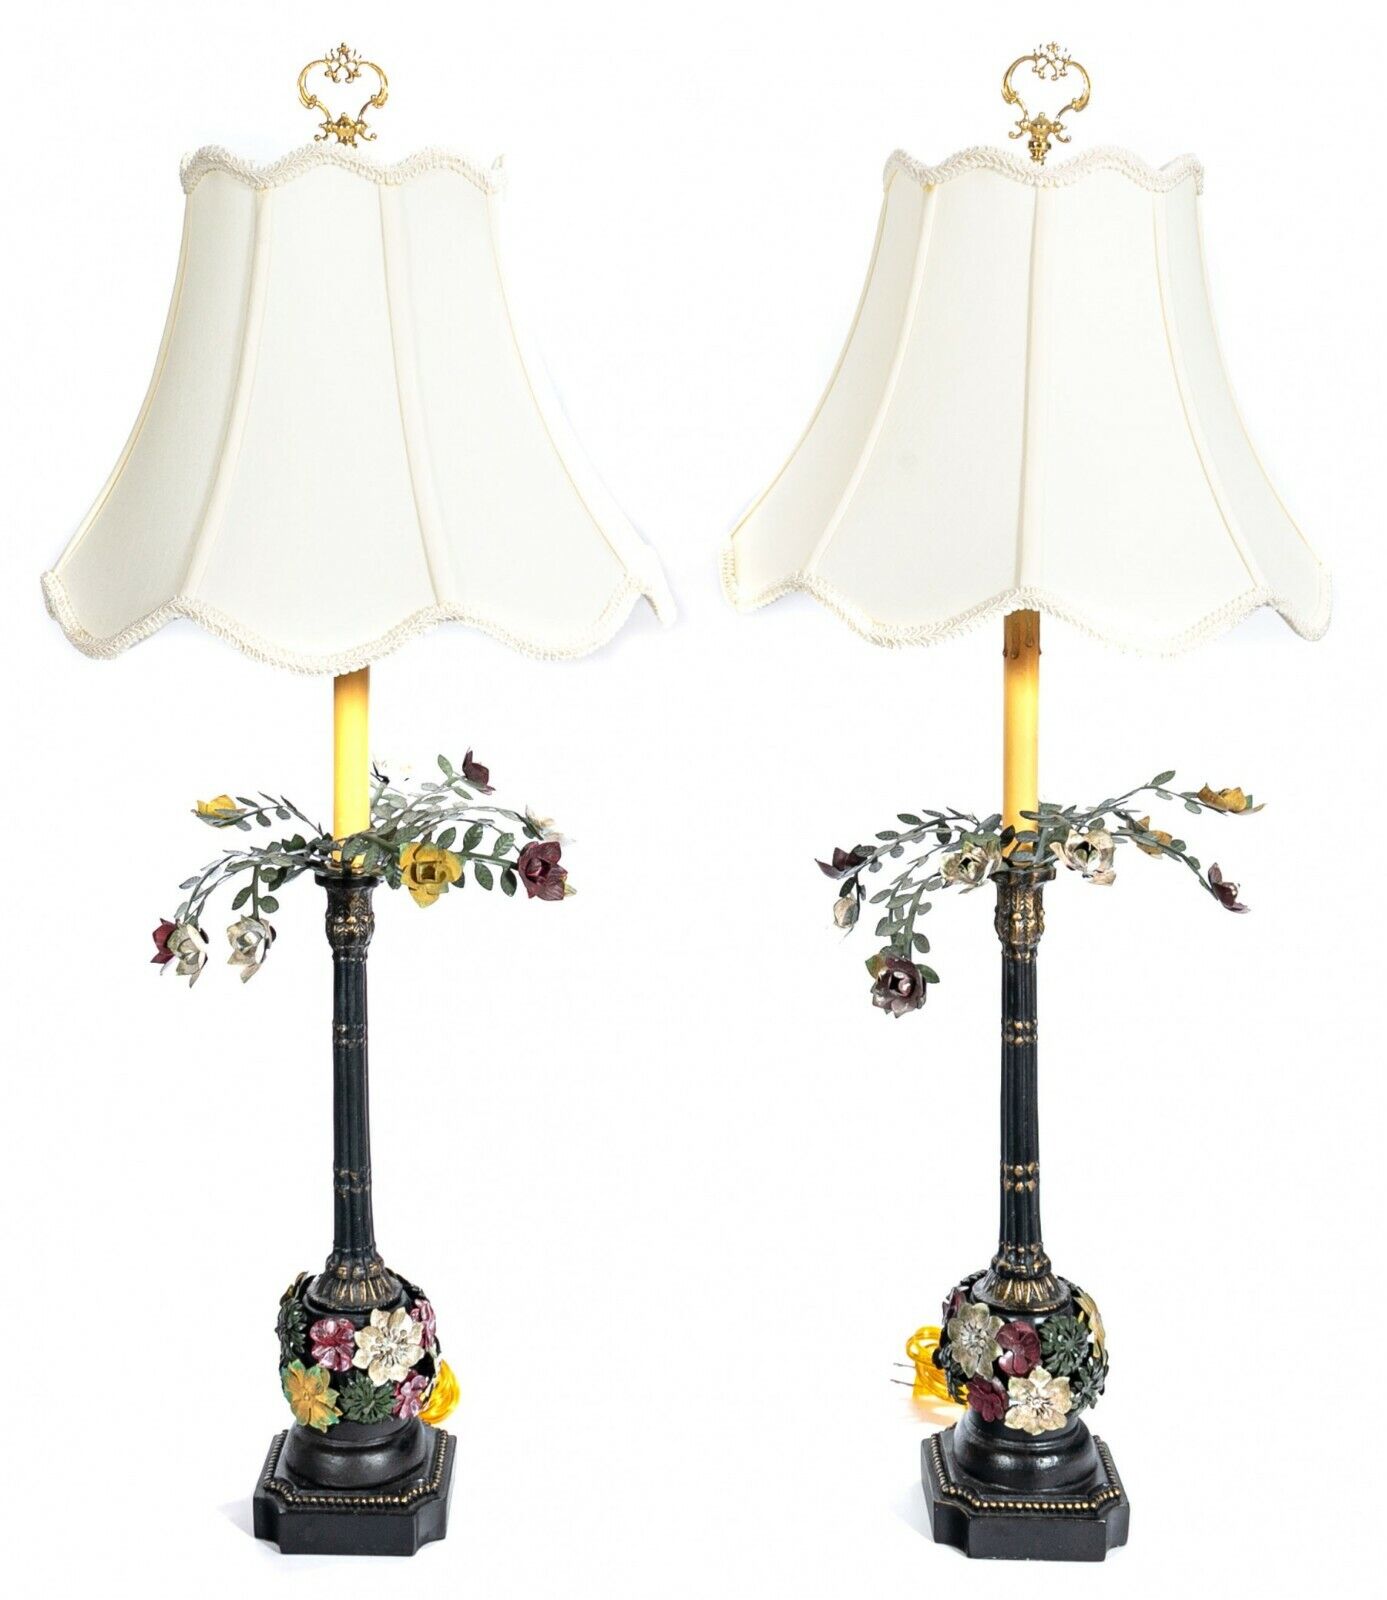 Beautiful Vintage Italian Tole Table Lamps with Lamp Shades: High End Excellent